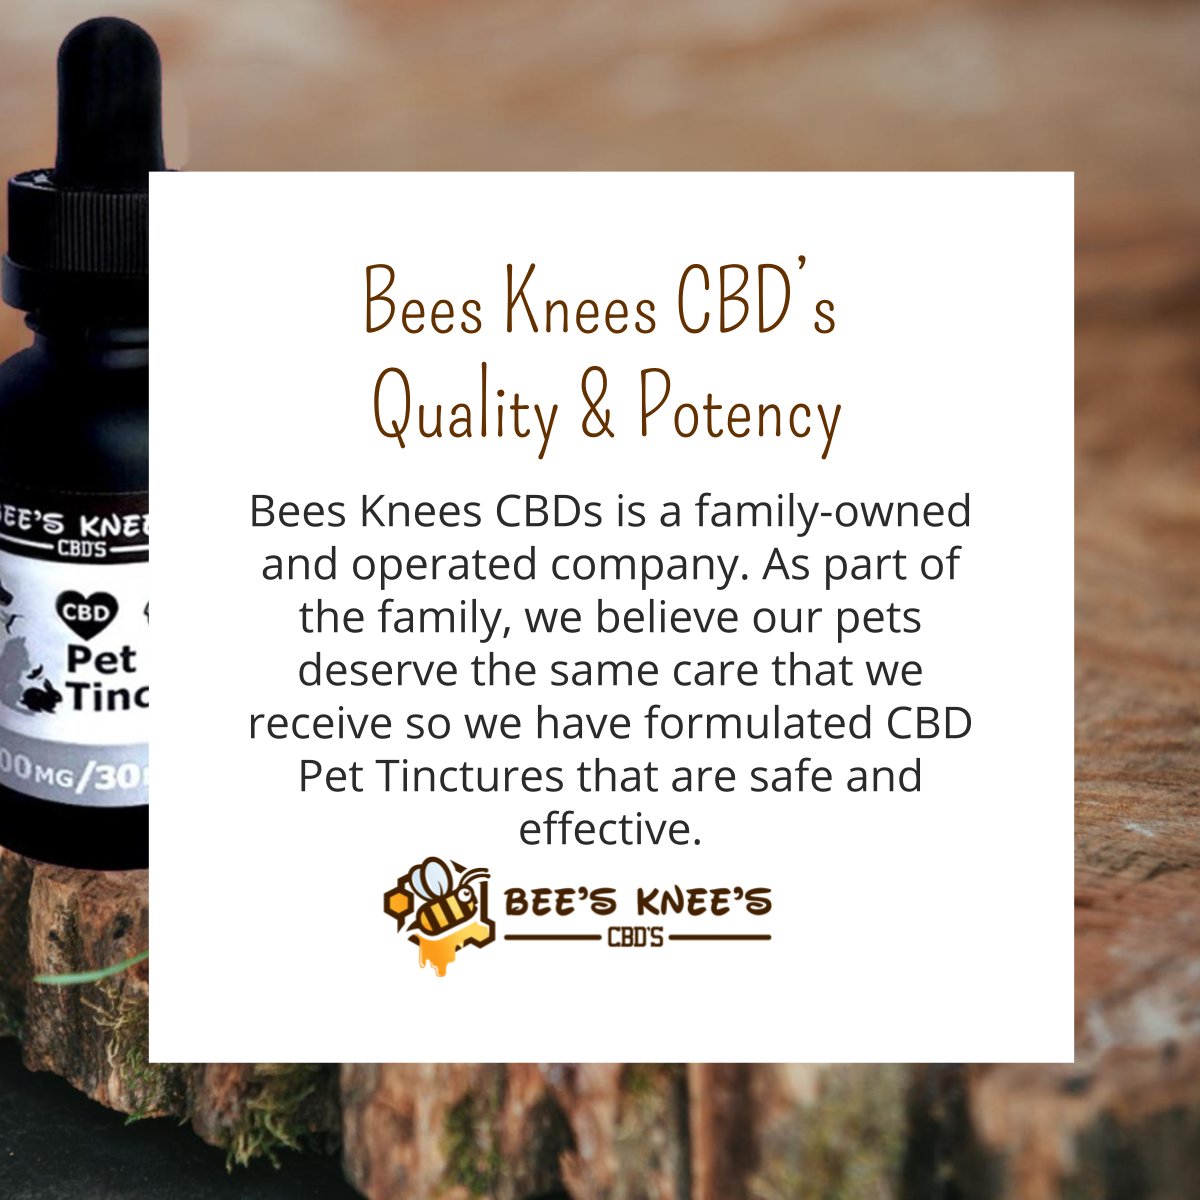 Bees Knees CBDs is a family-owned and operated business. As part of the family, our pets deserve the best care so we have formulated CBD Pet Tinctures that are safe and effective. #cbdfordogs #cbdfordogshealth #cbdfordogsandcats #cbdfordogsproducts bit.ly/2Nao6qB